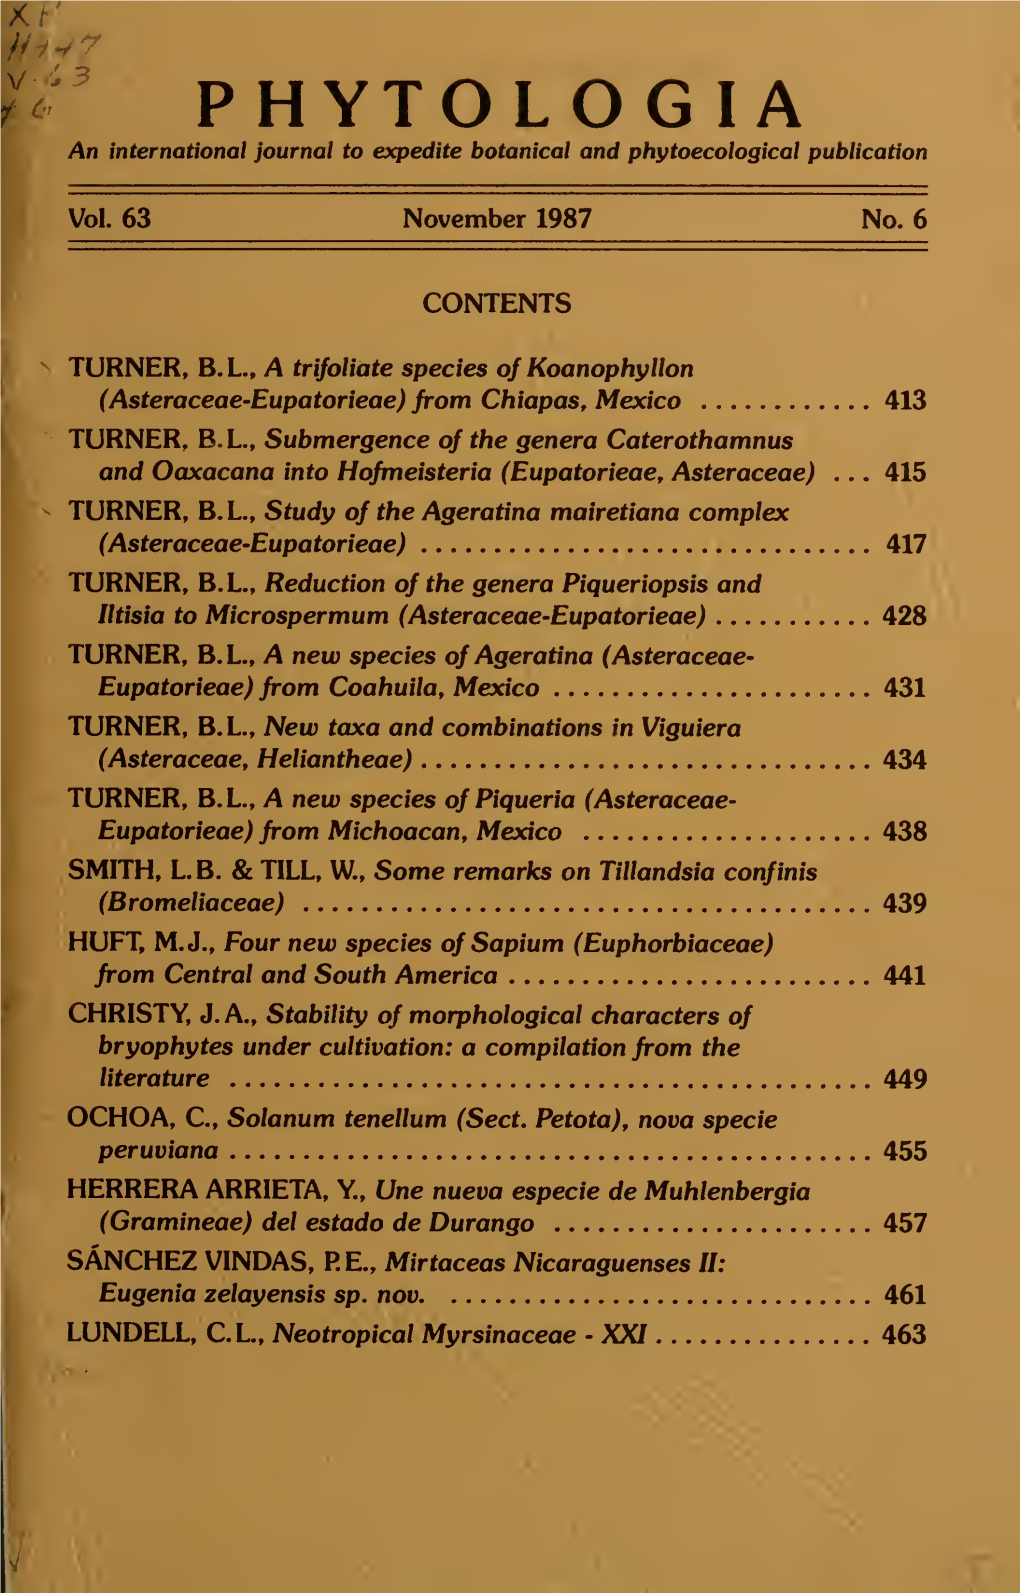 PHYTOLOGIA an International Journal to Expedite Botanical and Phytoecological Publication